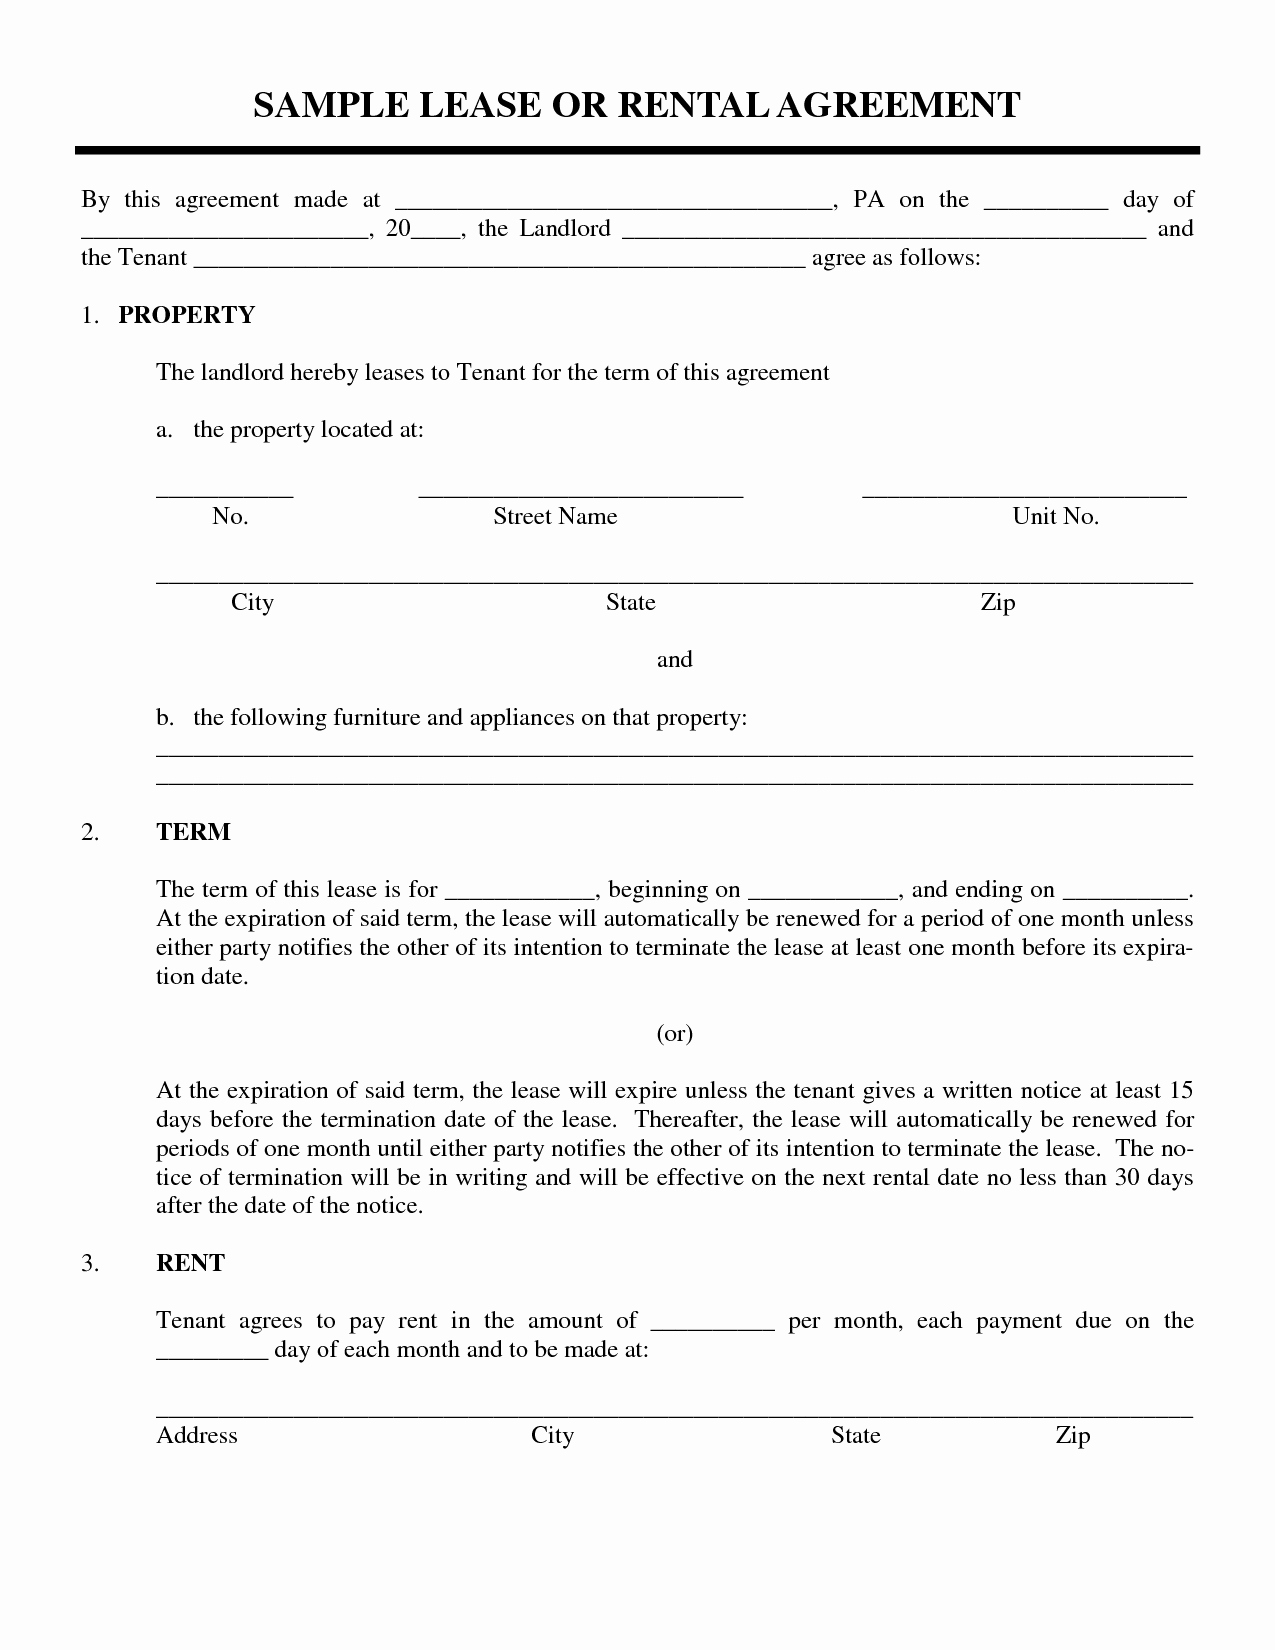 Basic Lease Agreement Template Awesome Sample Lease or Rental Agreement